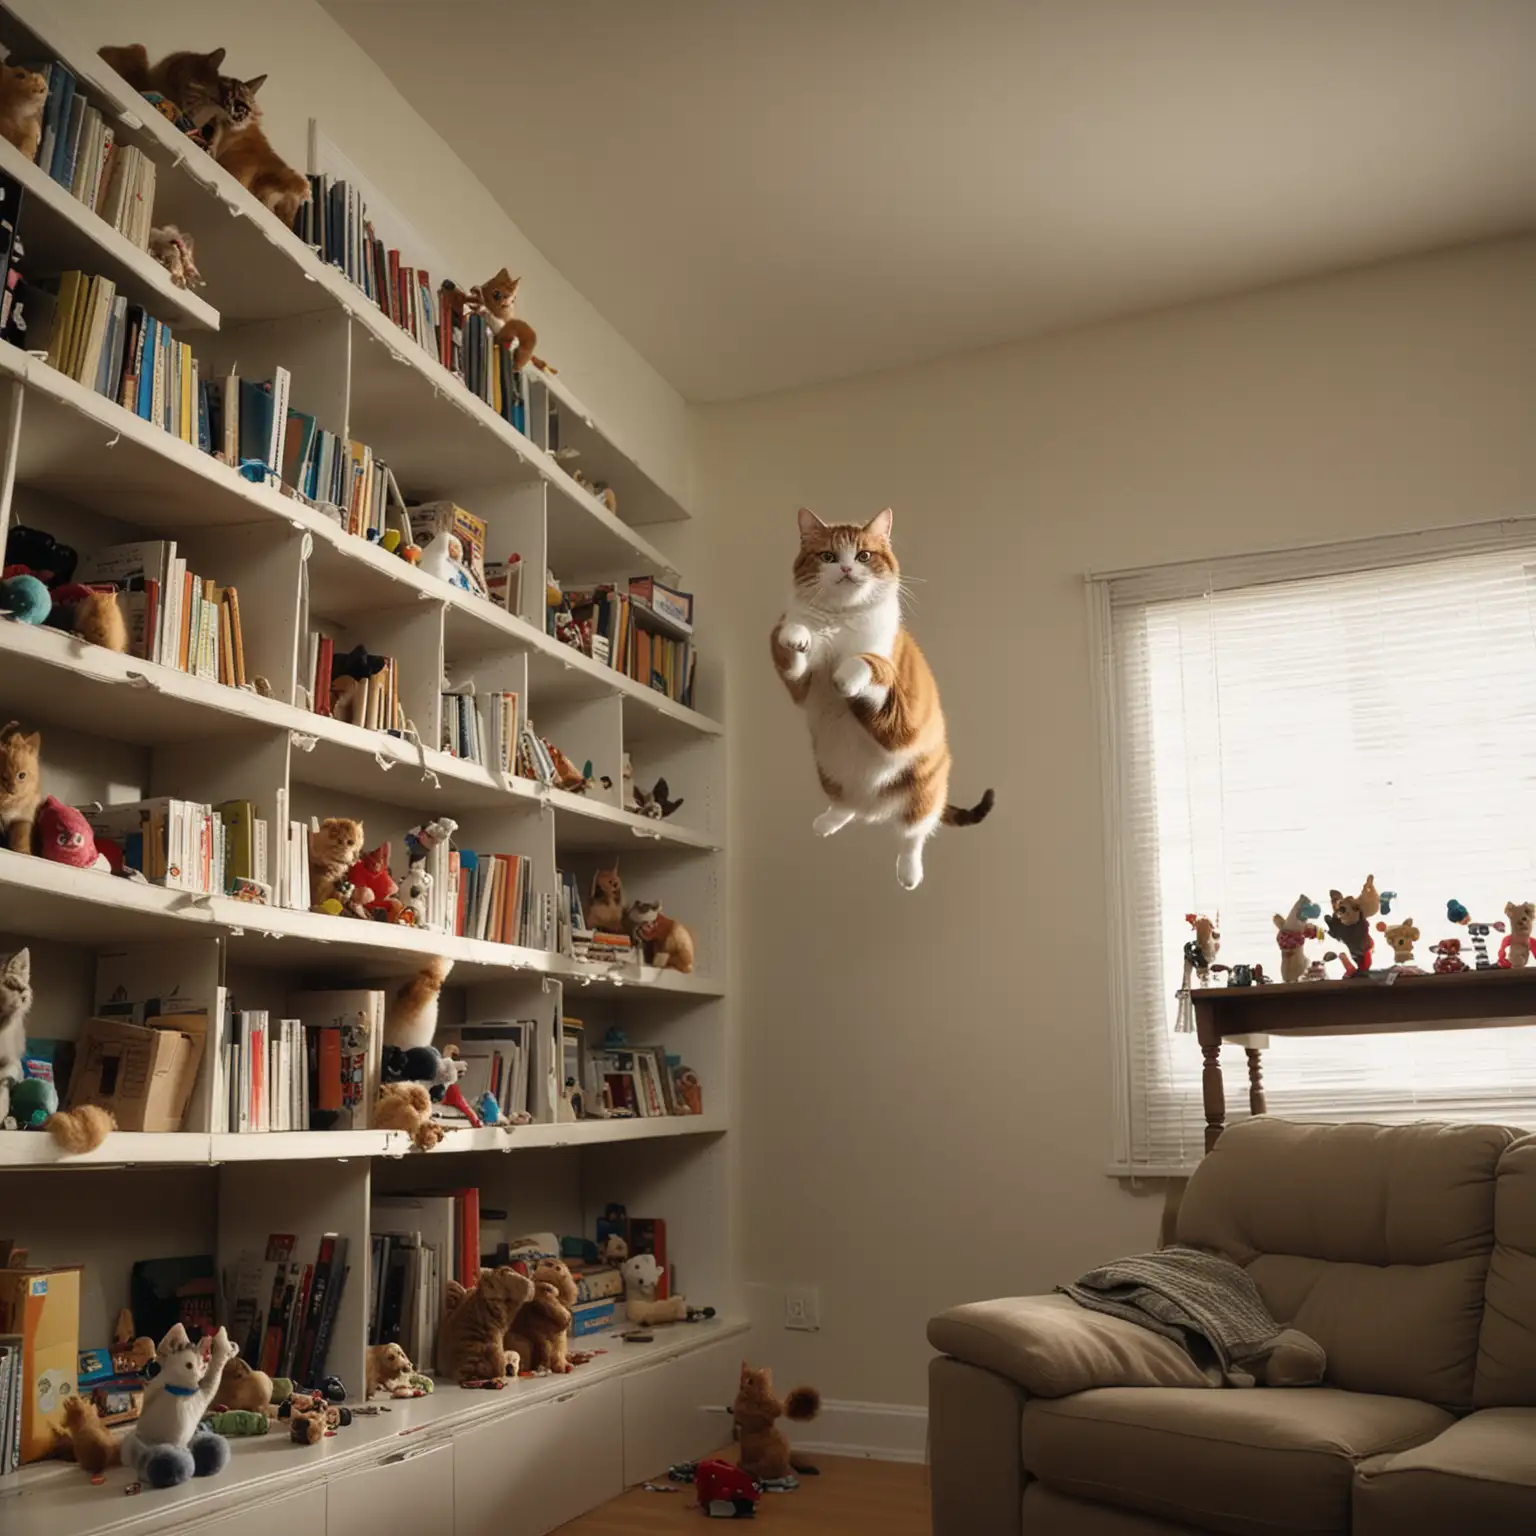 Adorable Cats Leap Mishap in Cluttered Living Room